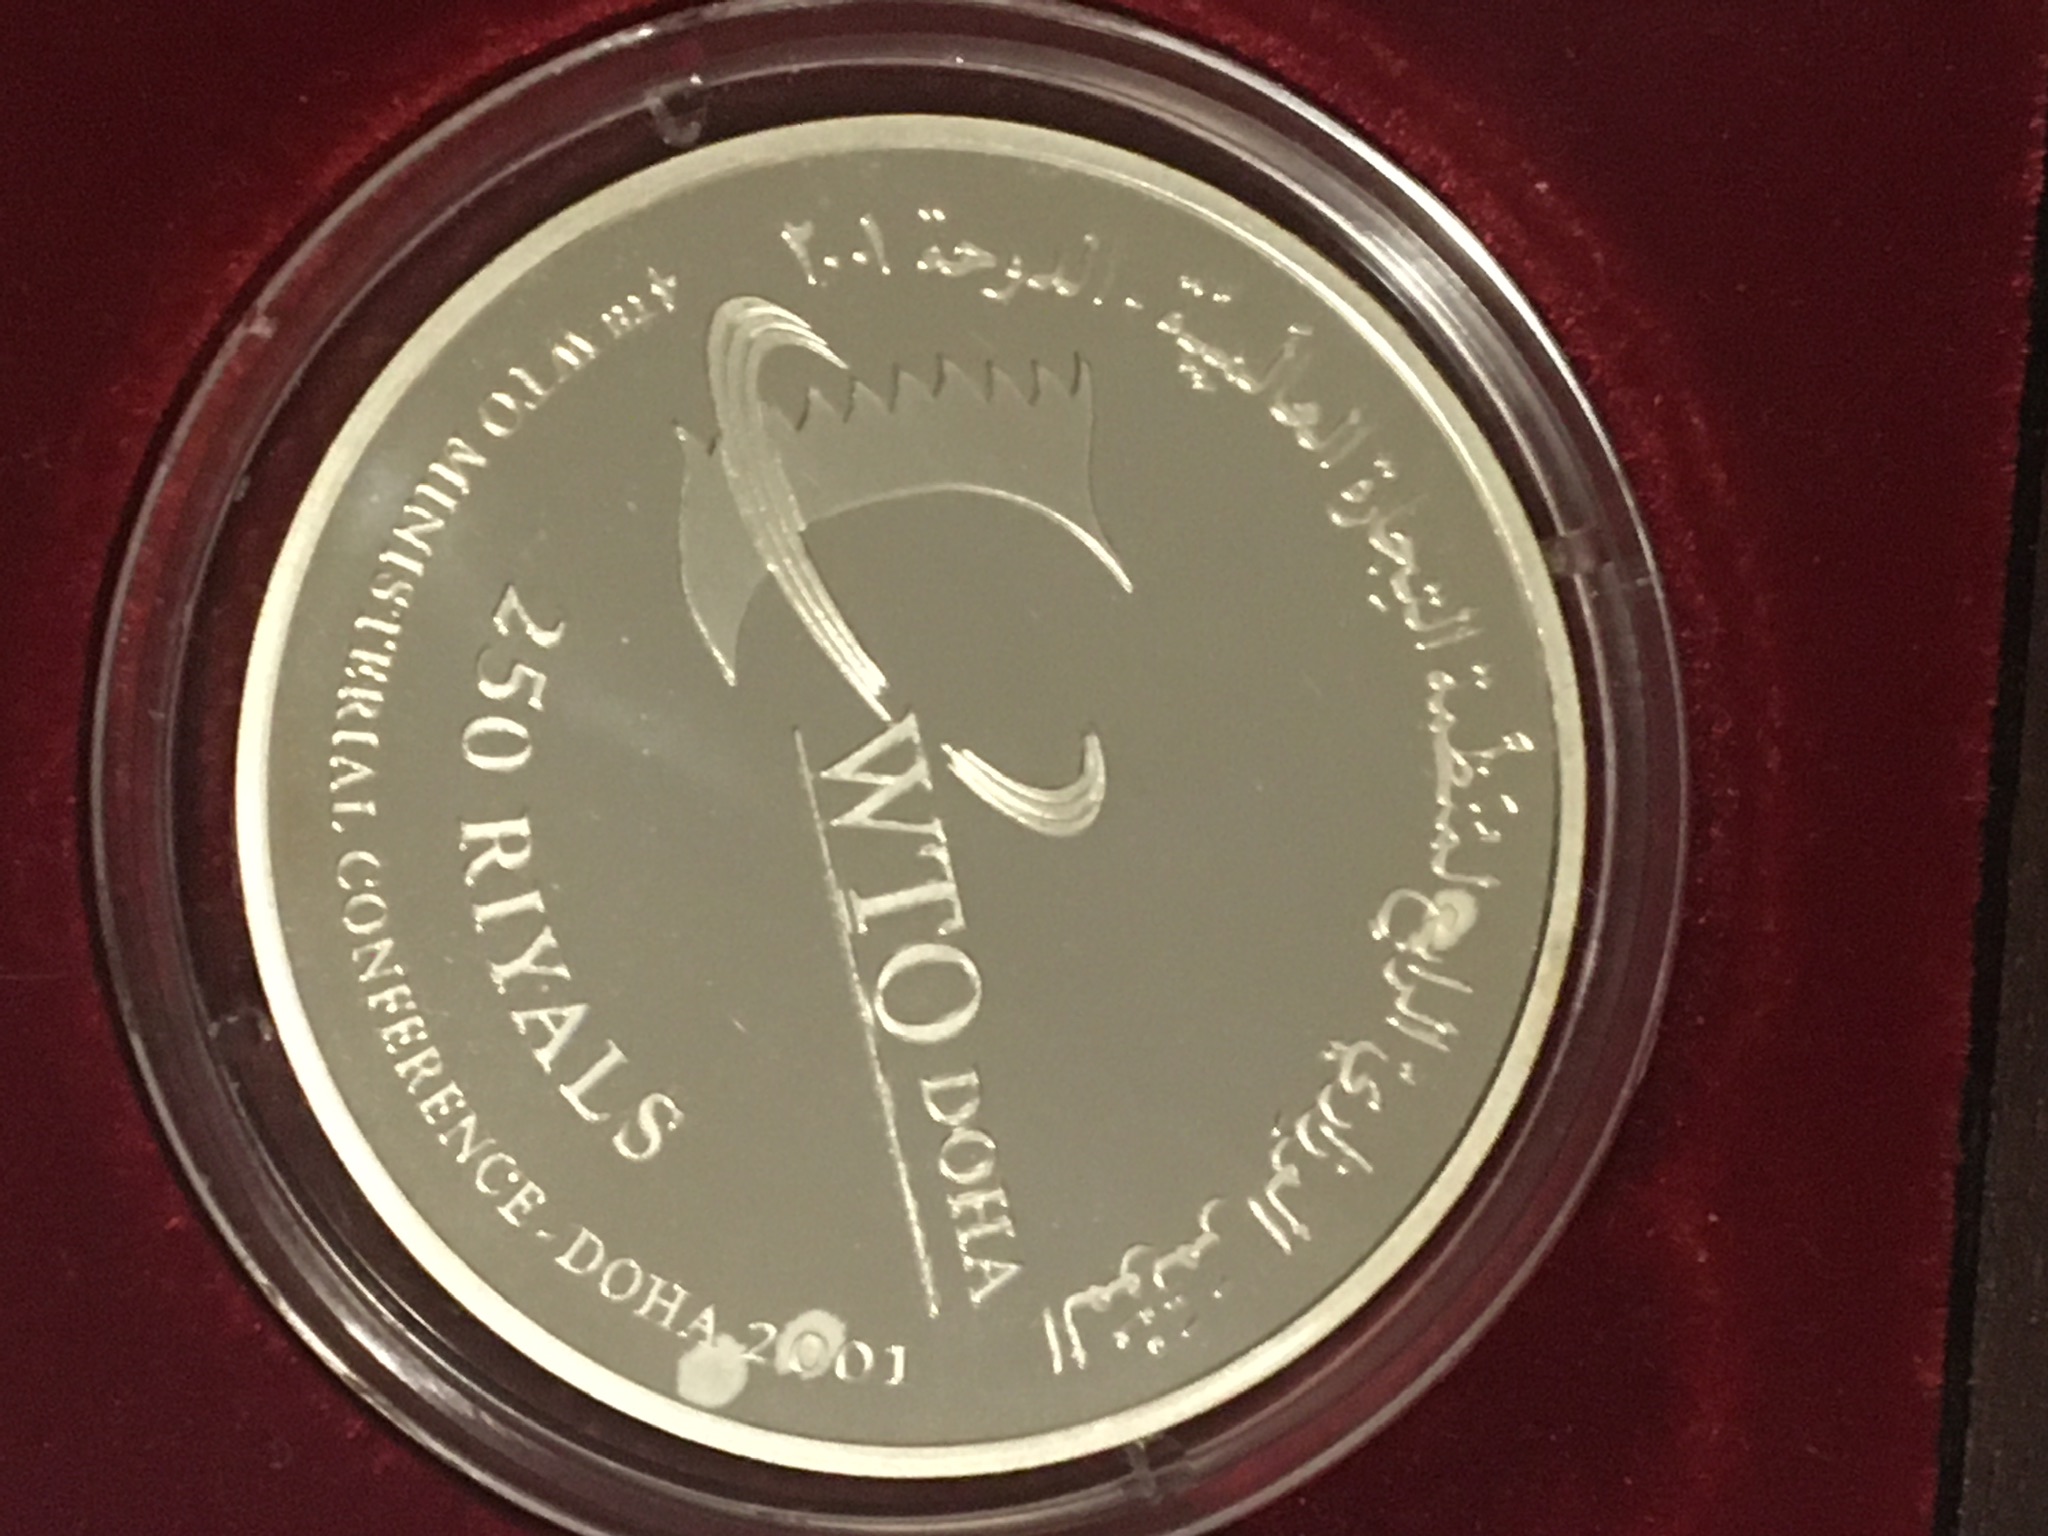 2001 Qatar 250 Riyals Silver Coin 4th WTO Ministerial Conference Doha KM# 11